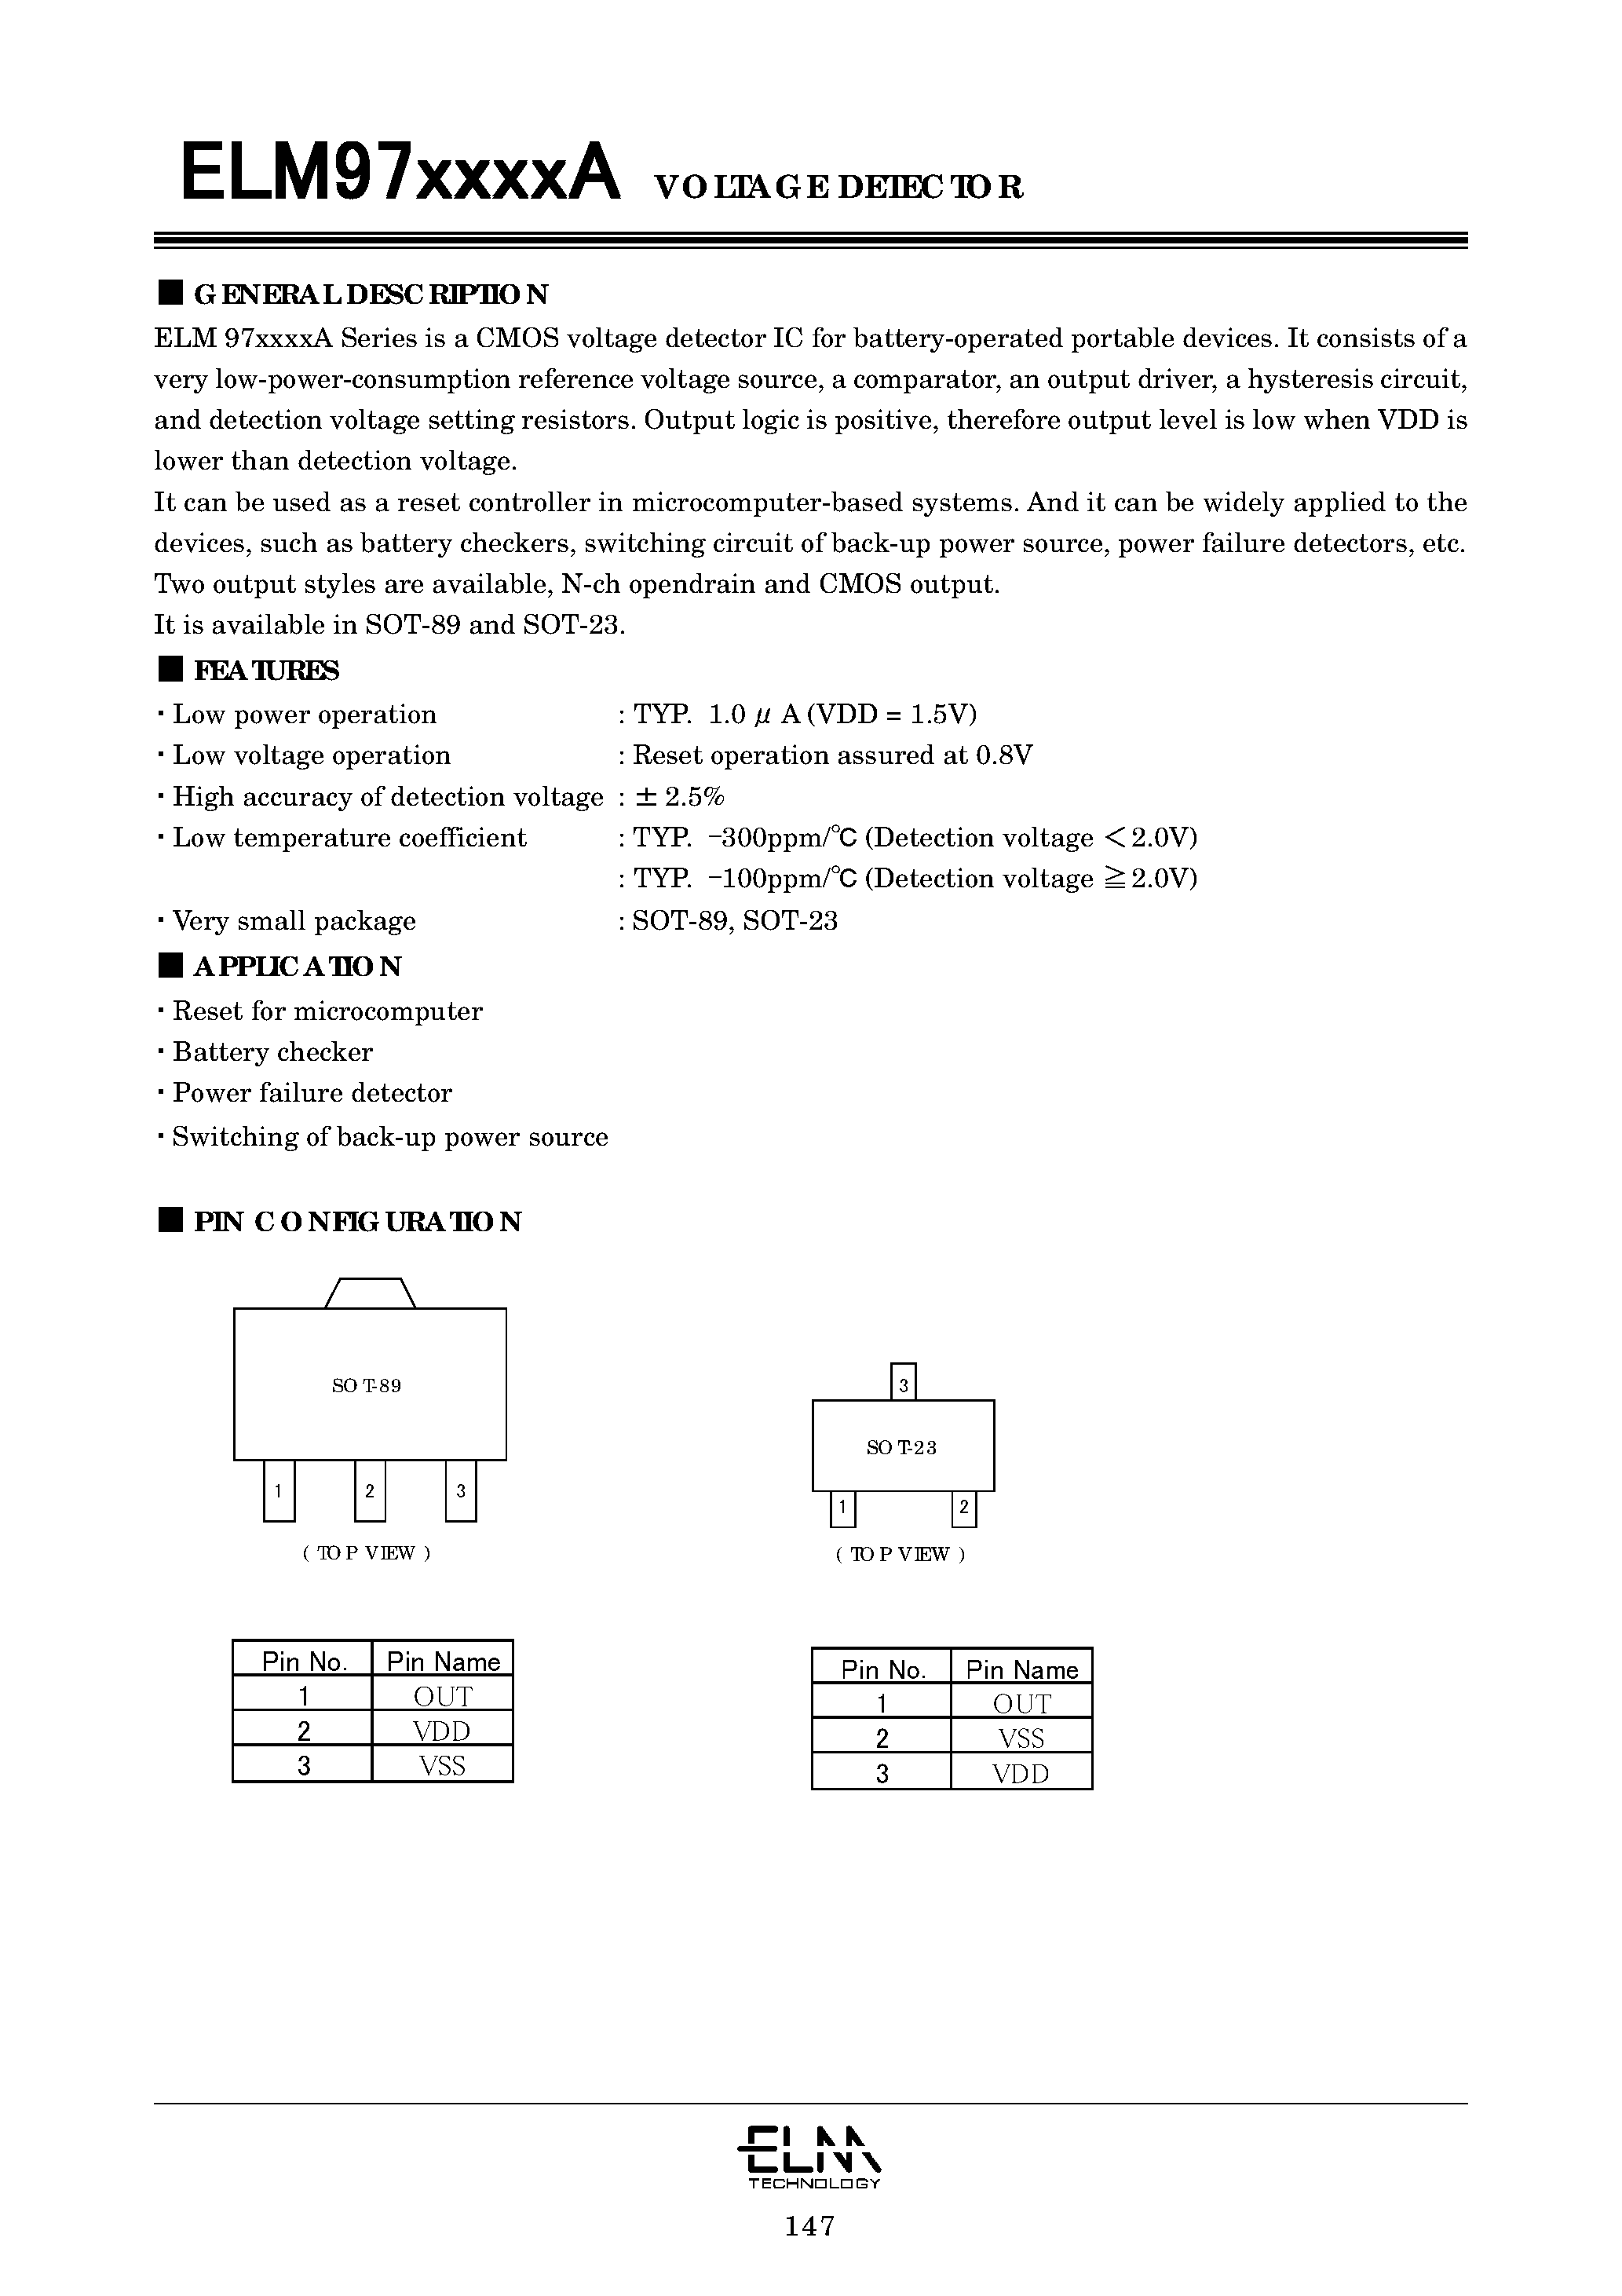 Datasheet ELM9727CAA-N - CMOS voltage detector IC for battery-operated portable devices page 1